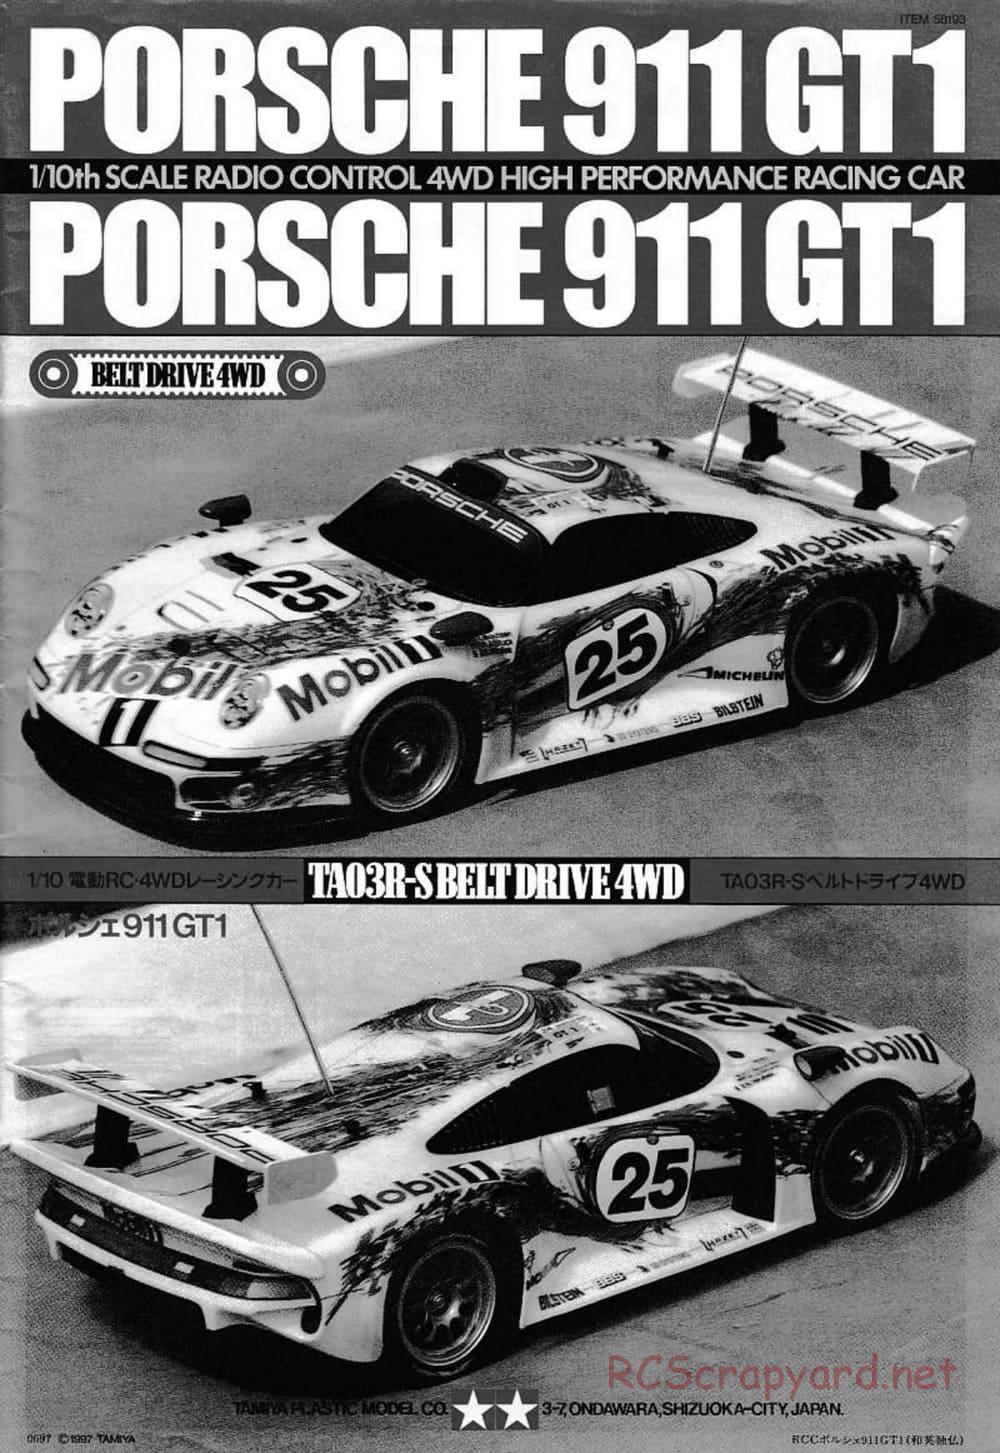 Tamiya - Porsche 911 GT1 - TA-03RS Chassis - Manual - Page 1